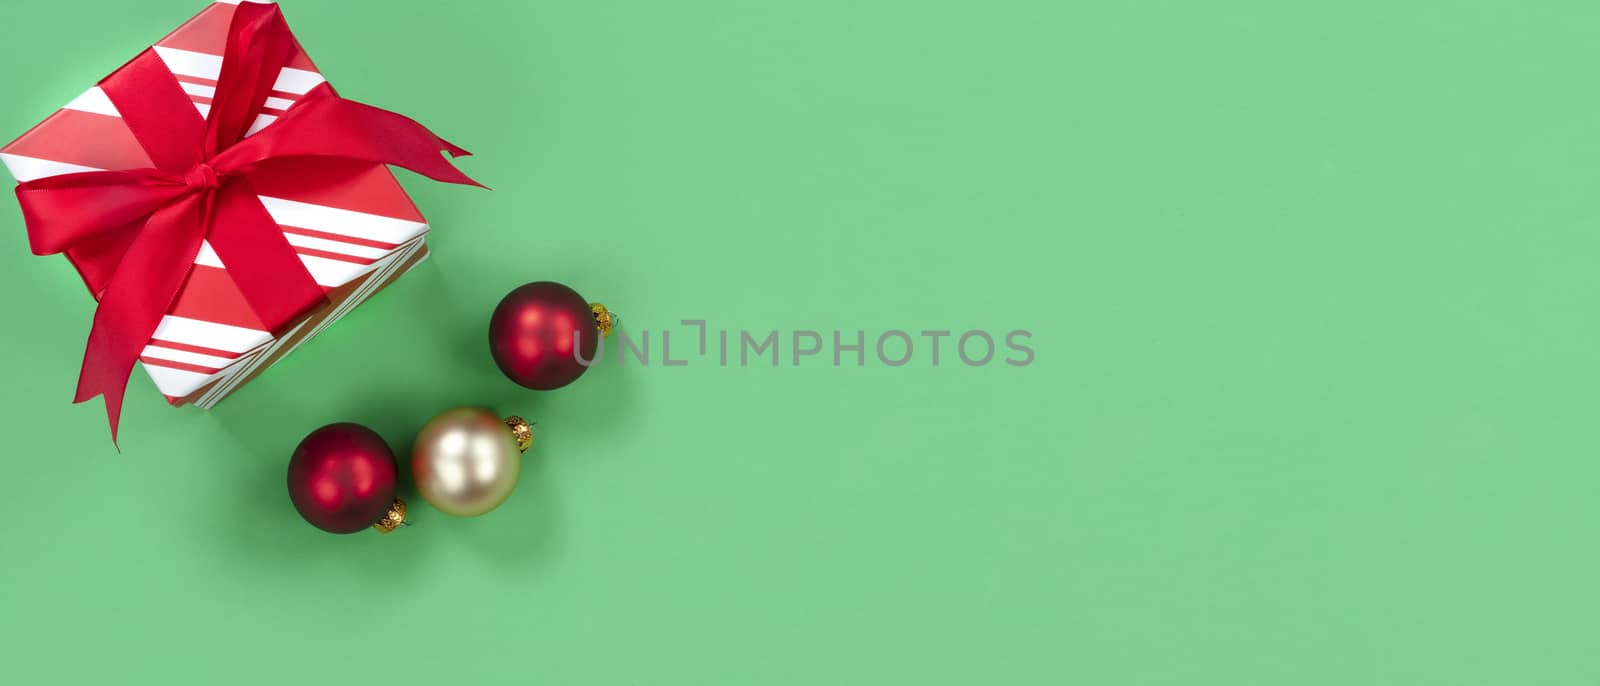 Green background with gift box and ornaments for the Christmas season 